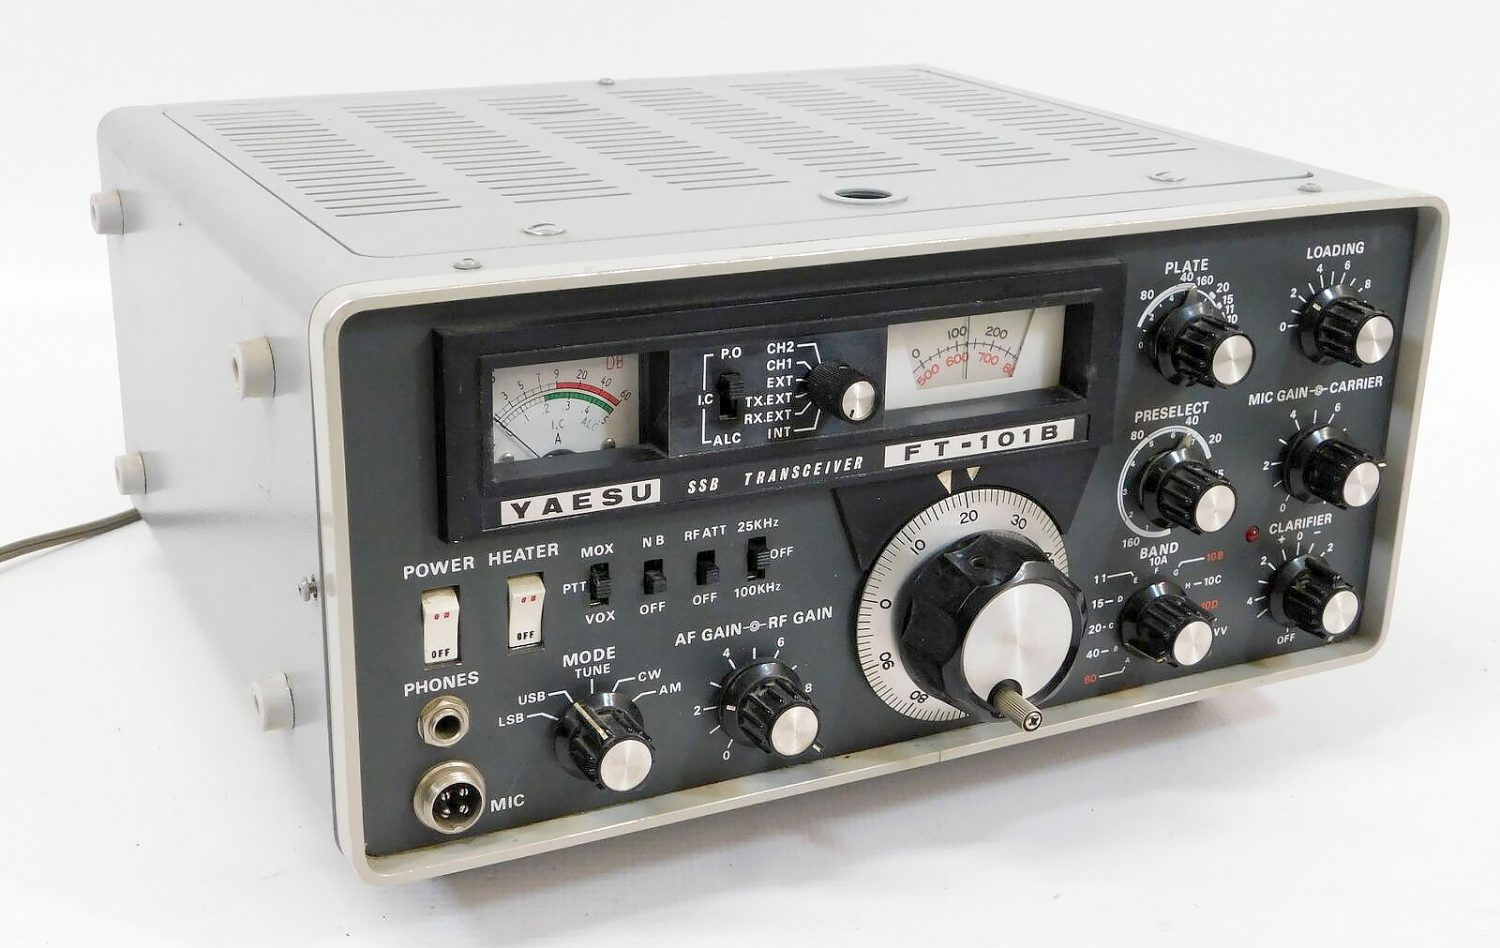 Yaesu FT-101B, The view of the front panel.